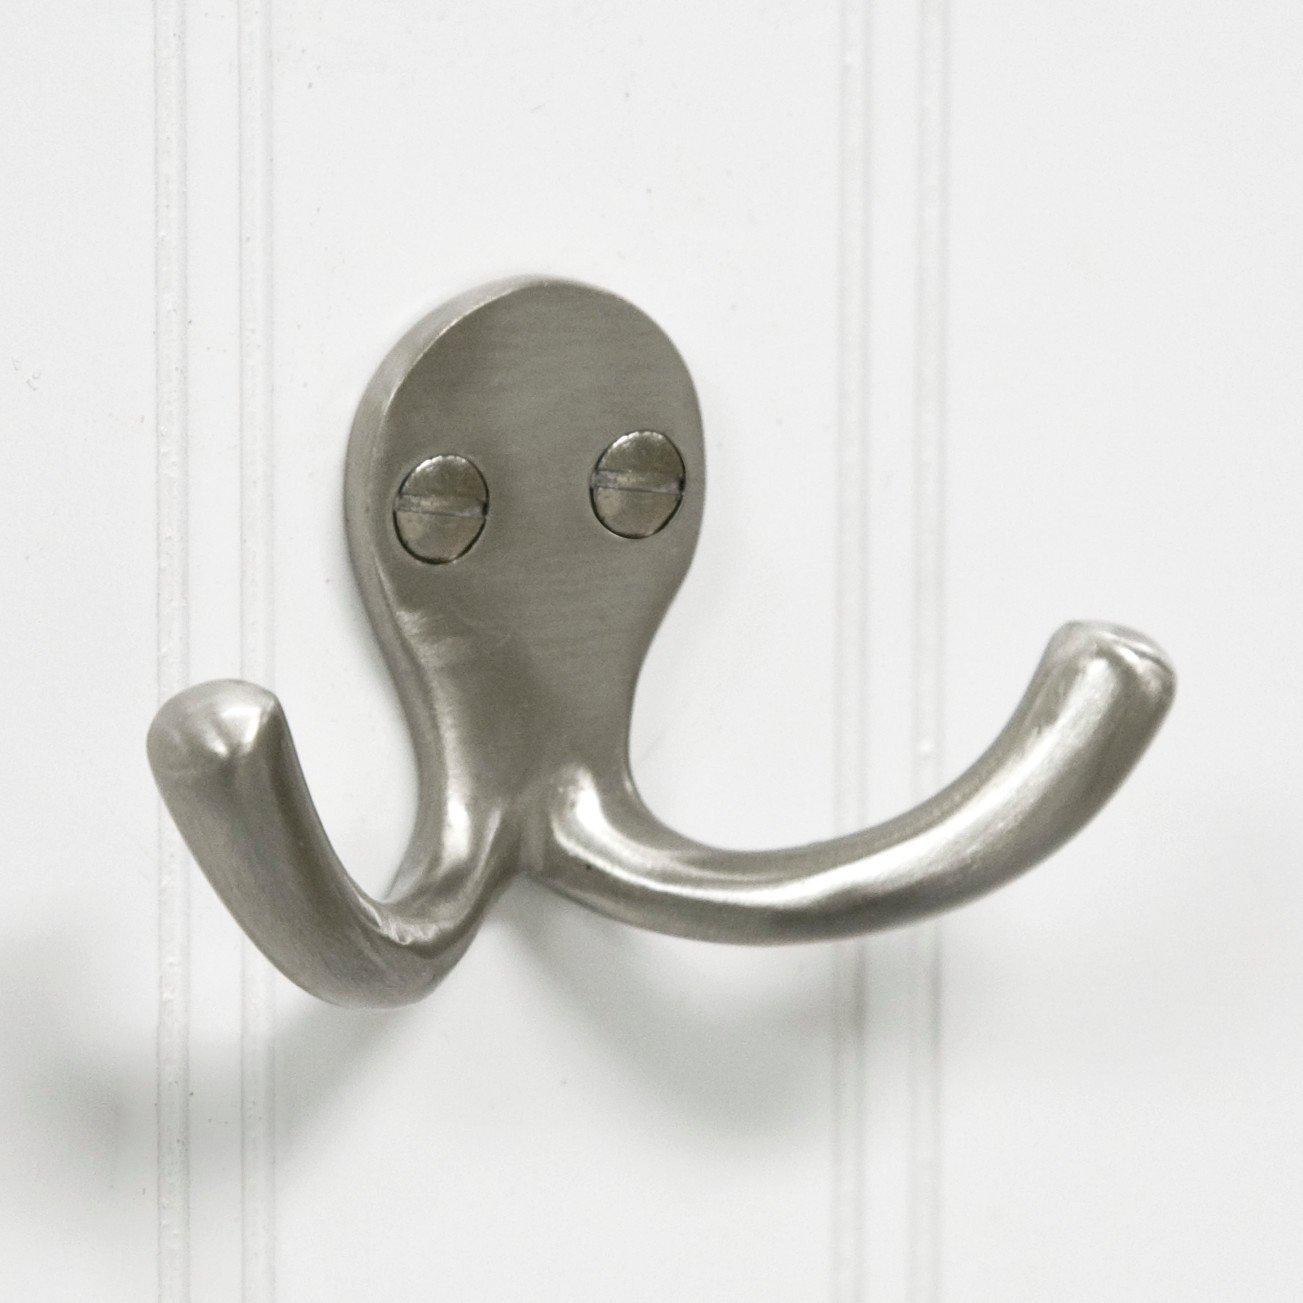 Signature Hardware 251363 Solid Brass Small Double Coat Hook - Nickel, Silver